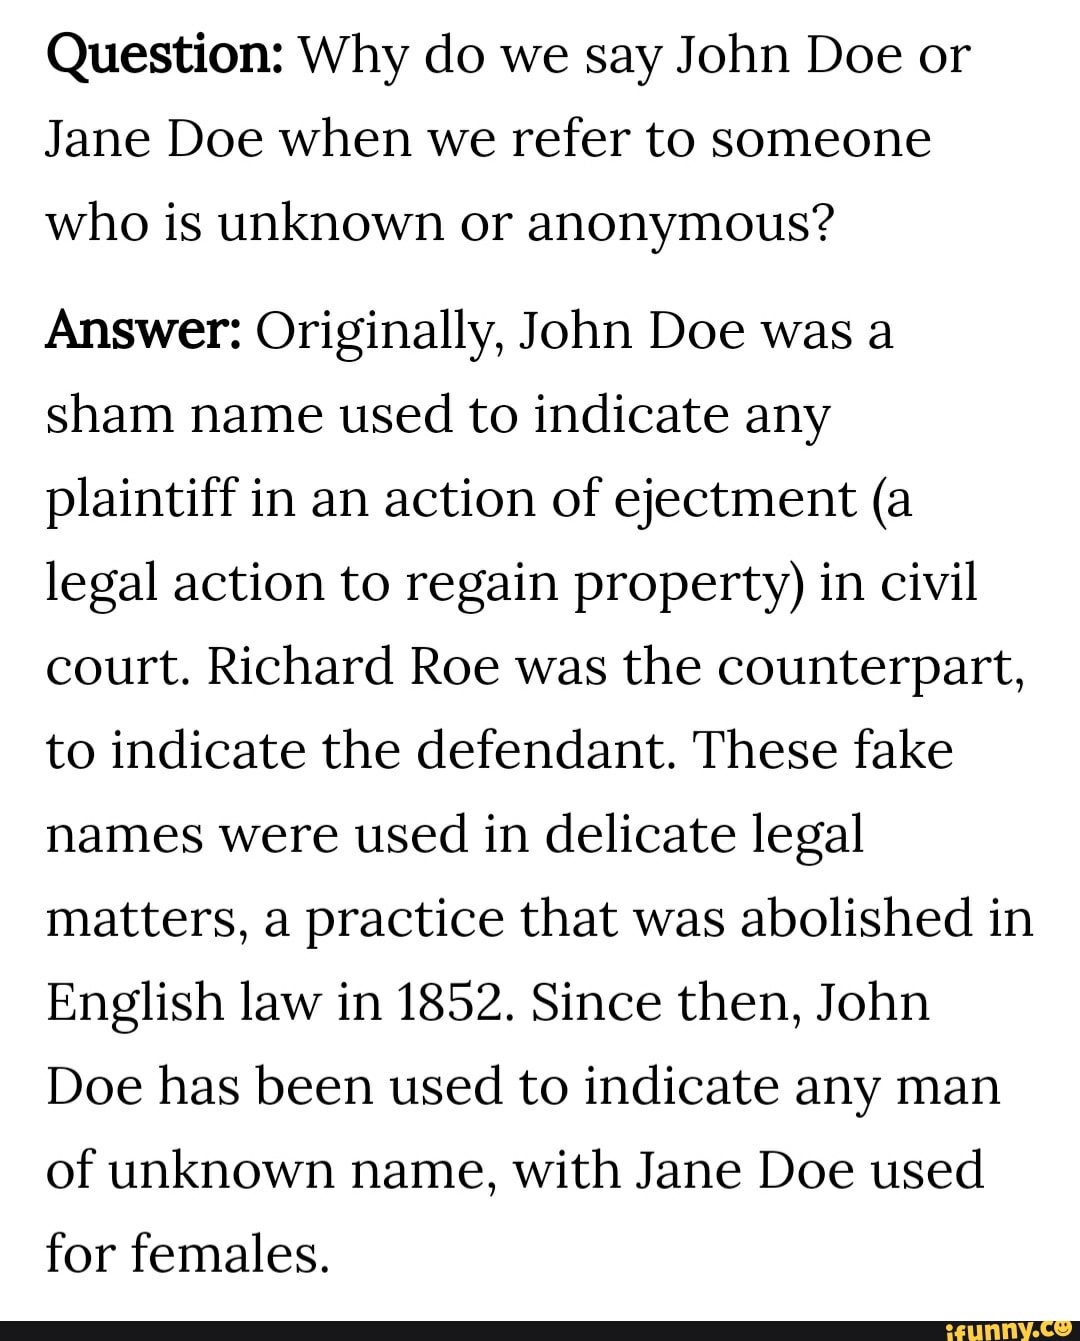 Question: Why do we say John Doe or Jane Doe when we refer to